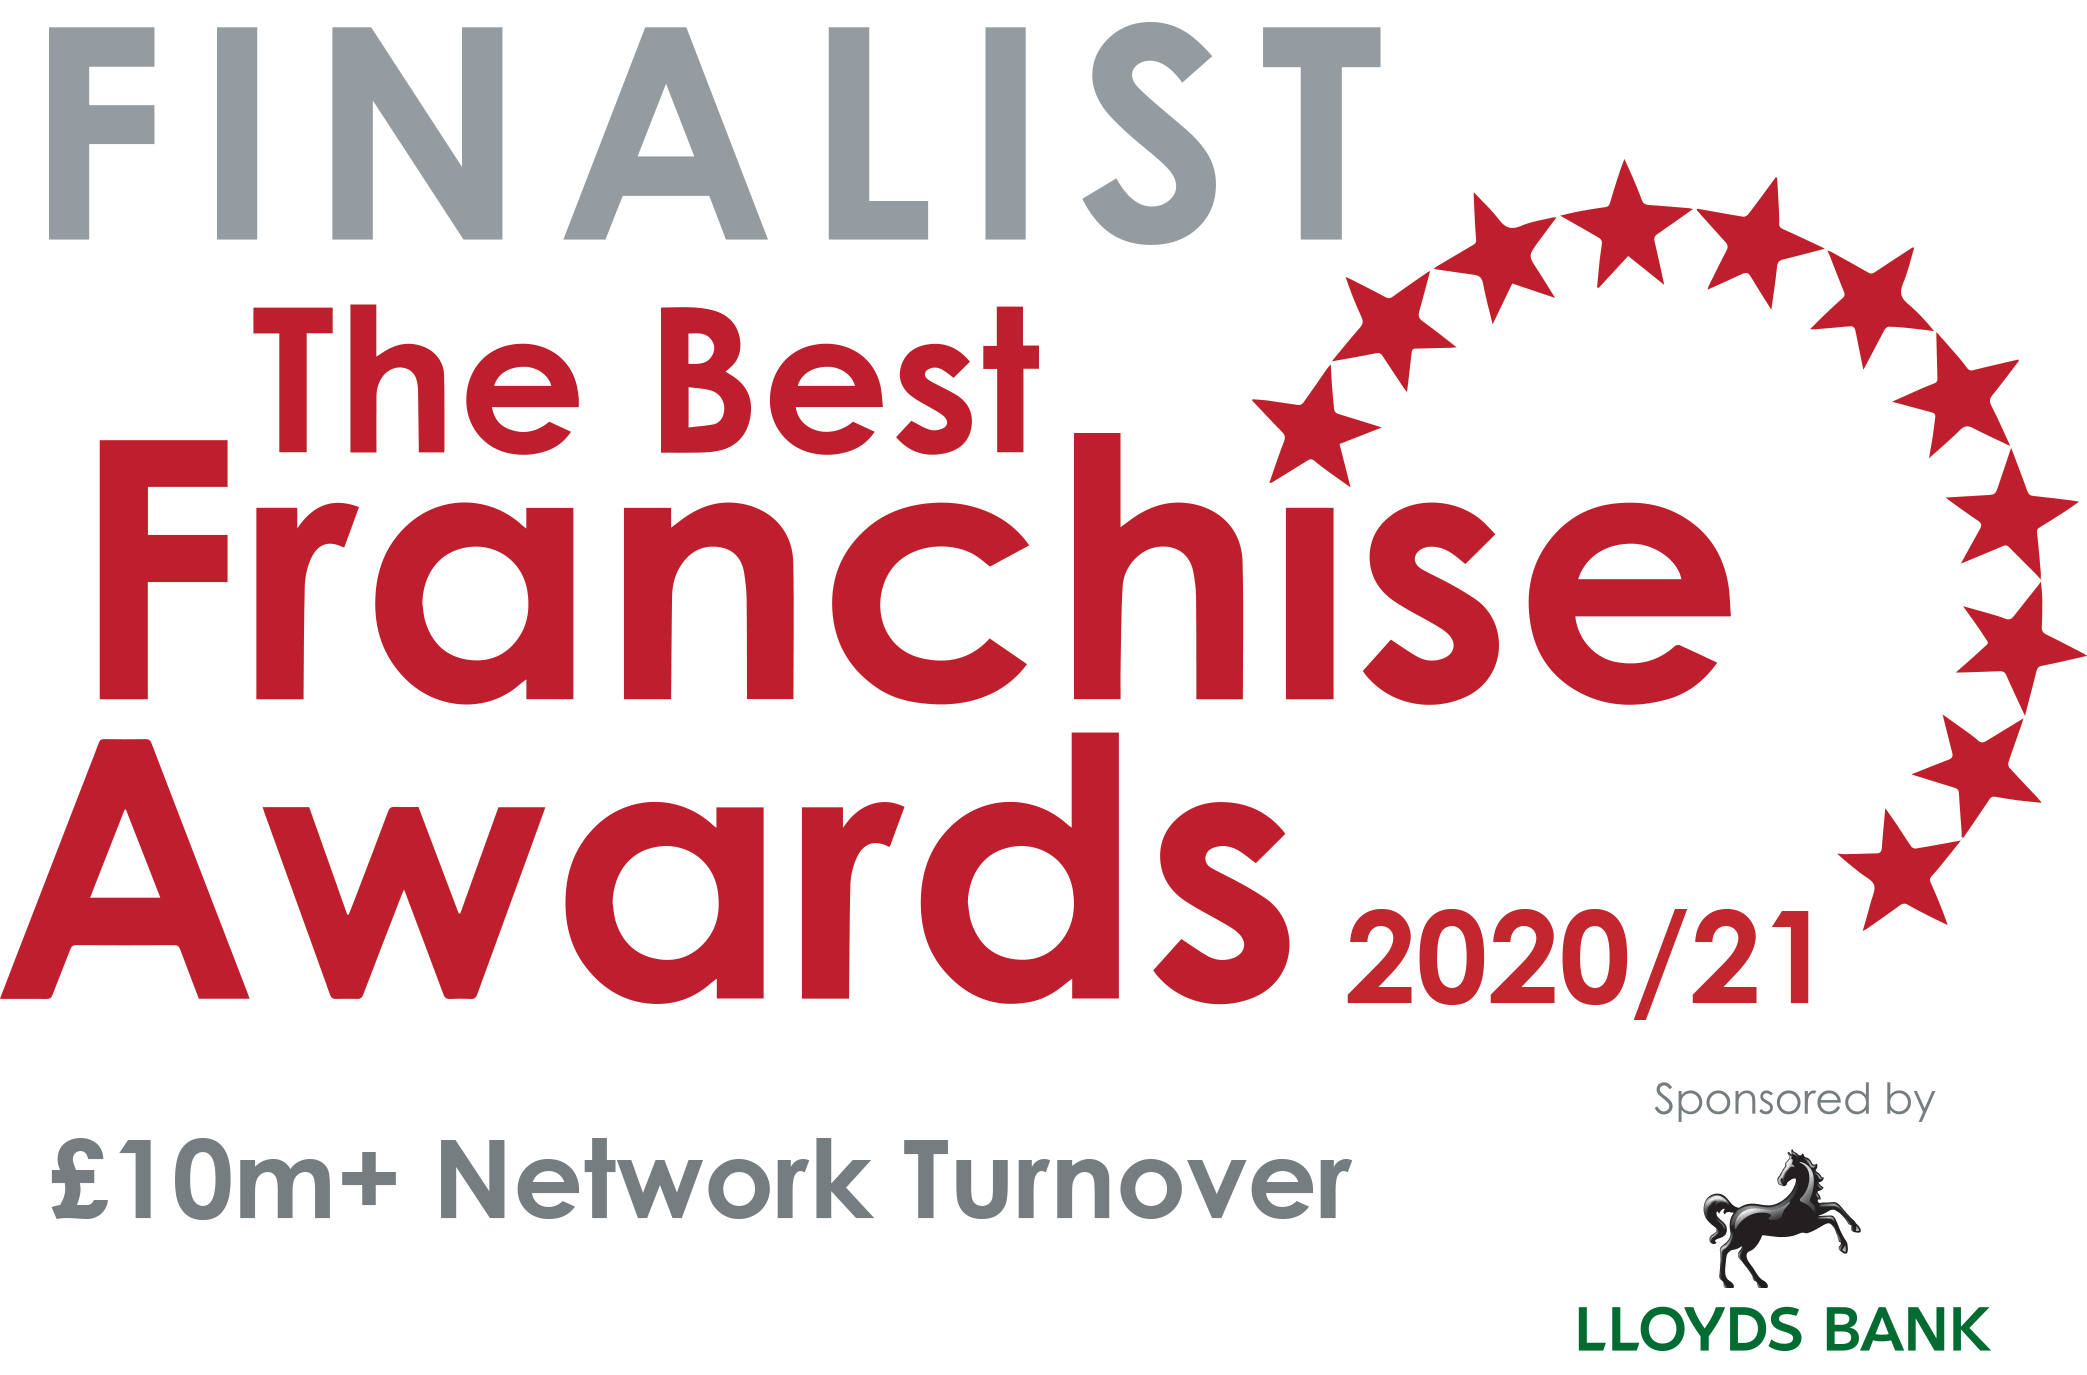 TaxAssist Accountants nominated for Best Franchise Award 2020 UK Franchise Opportunities